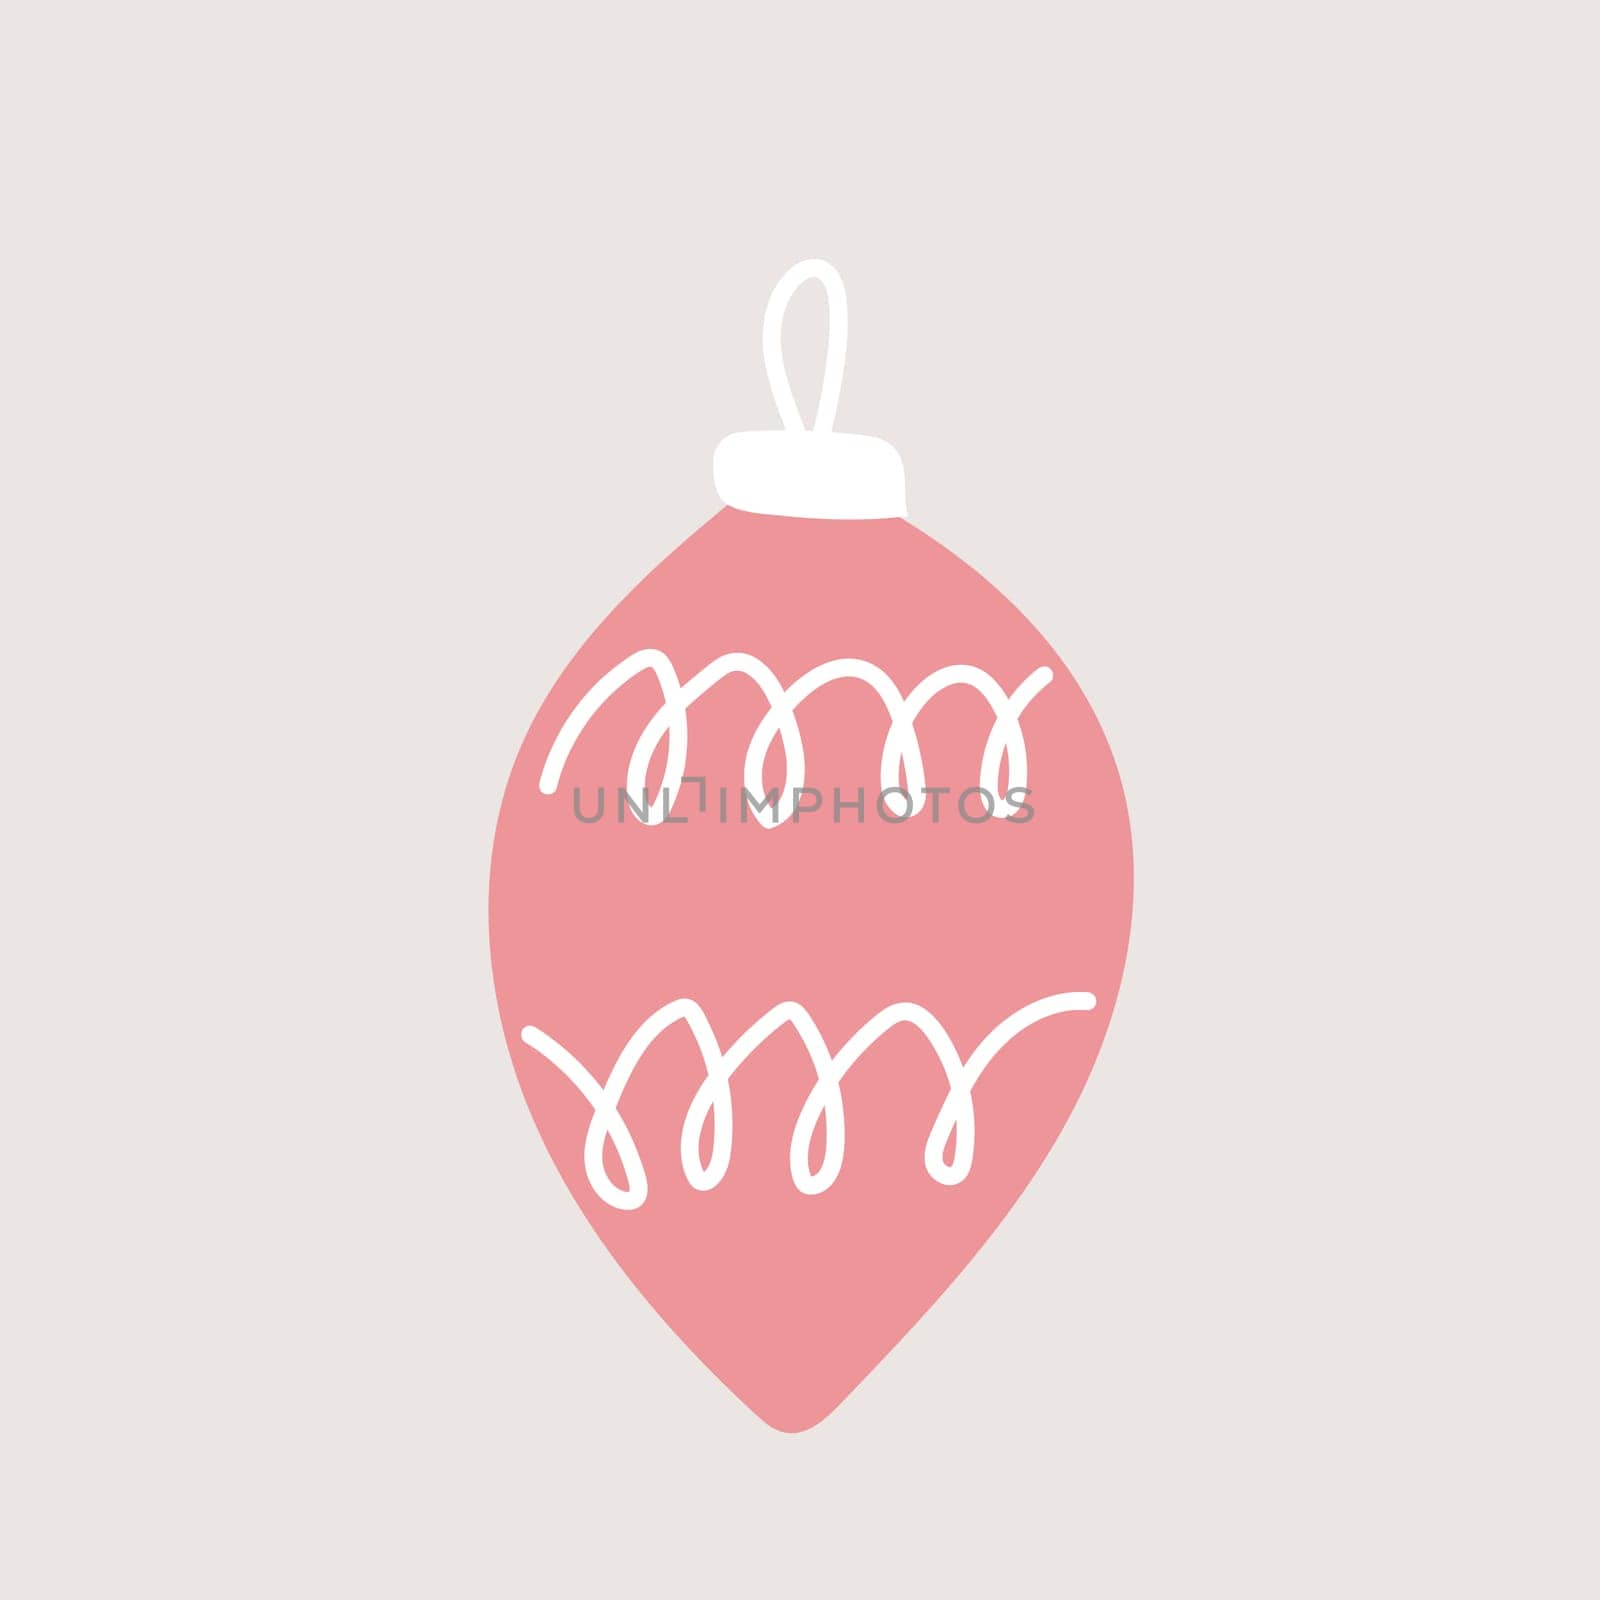 Vector hand drawn element, Christmas tree decoration, pink toy. Simple modern design, scandinavian style. For holiday cards, decorations, templates